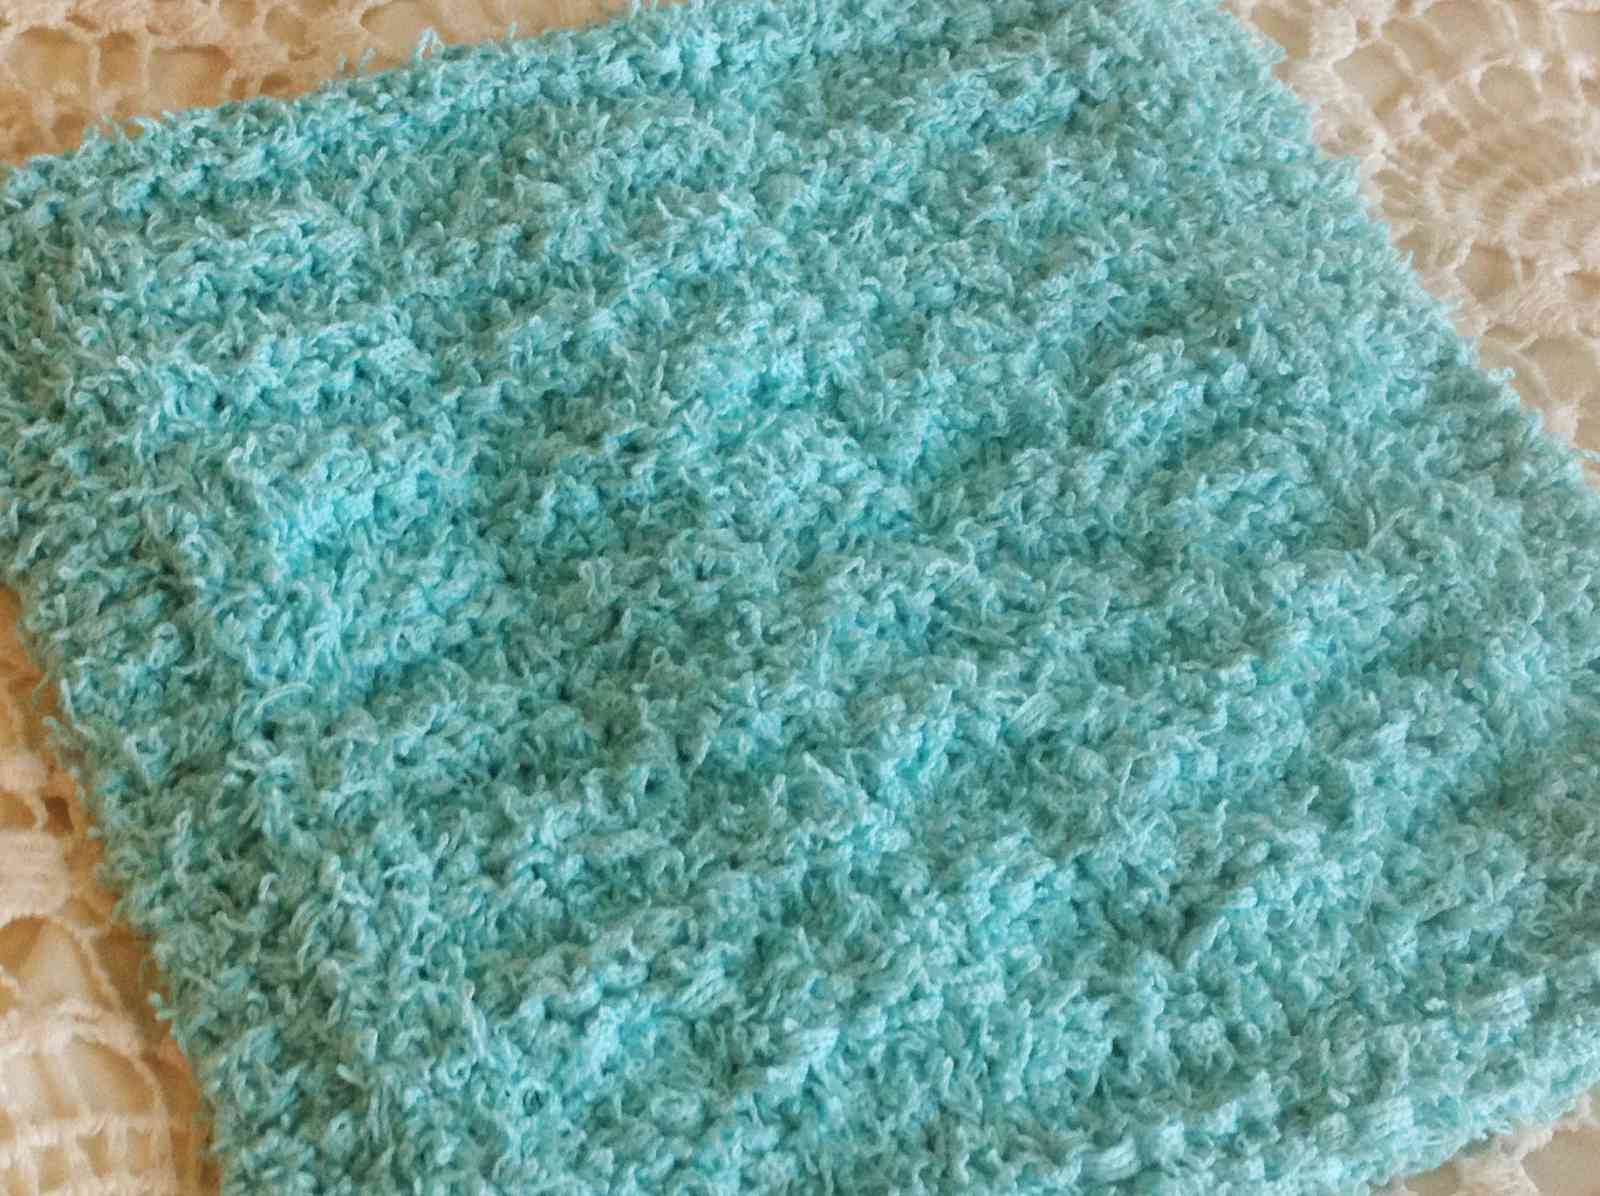 Easy Dishcloth Knit Pattern 10 Knit Dishcloth Patterns For Beginners